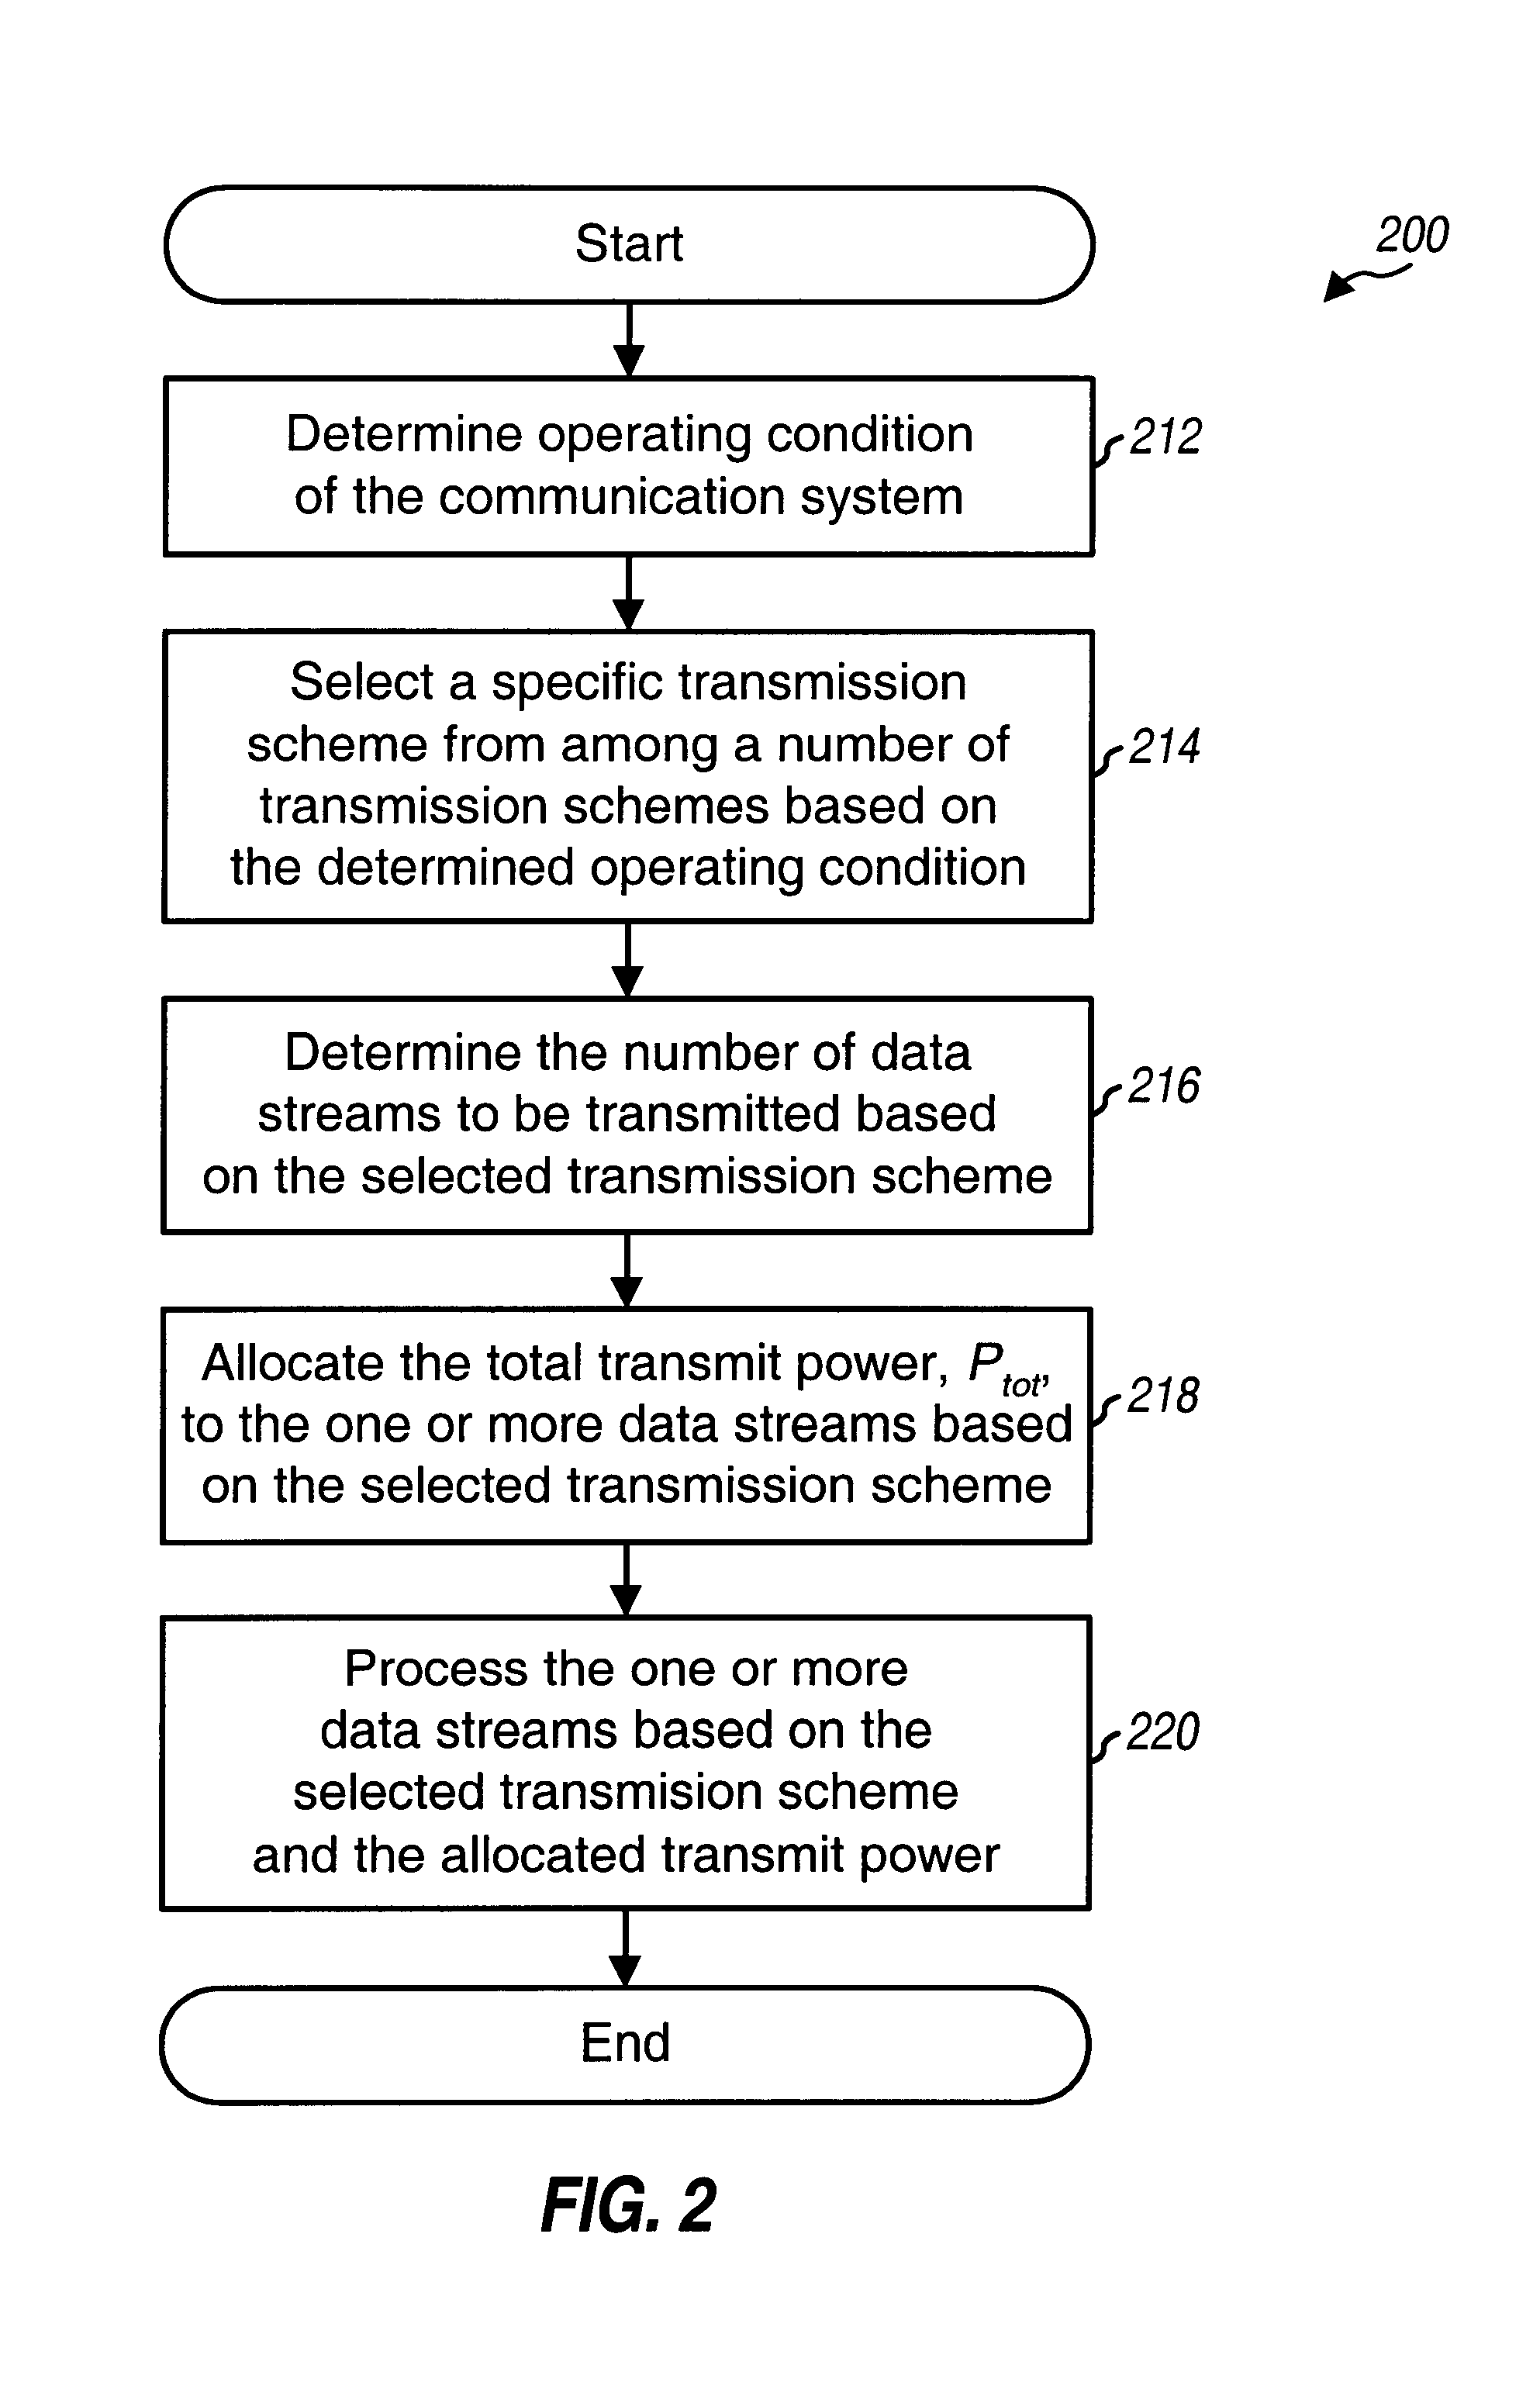 Multiple-input, multiple-output (MIMO) systems with multiple transmission modes